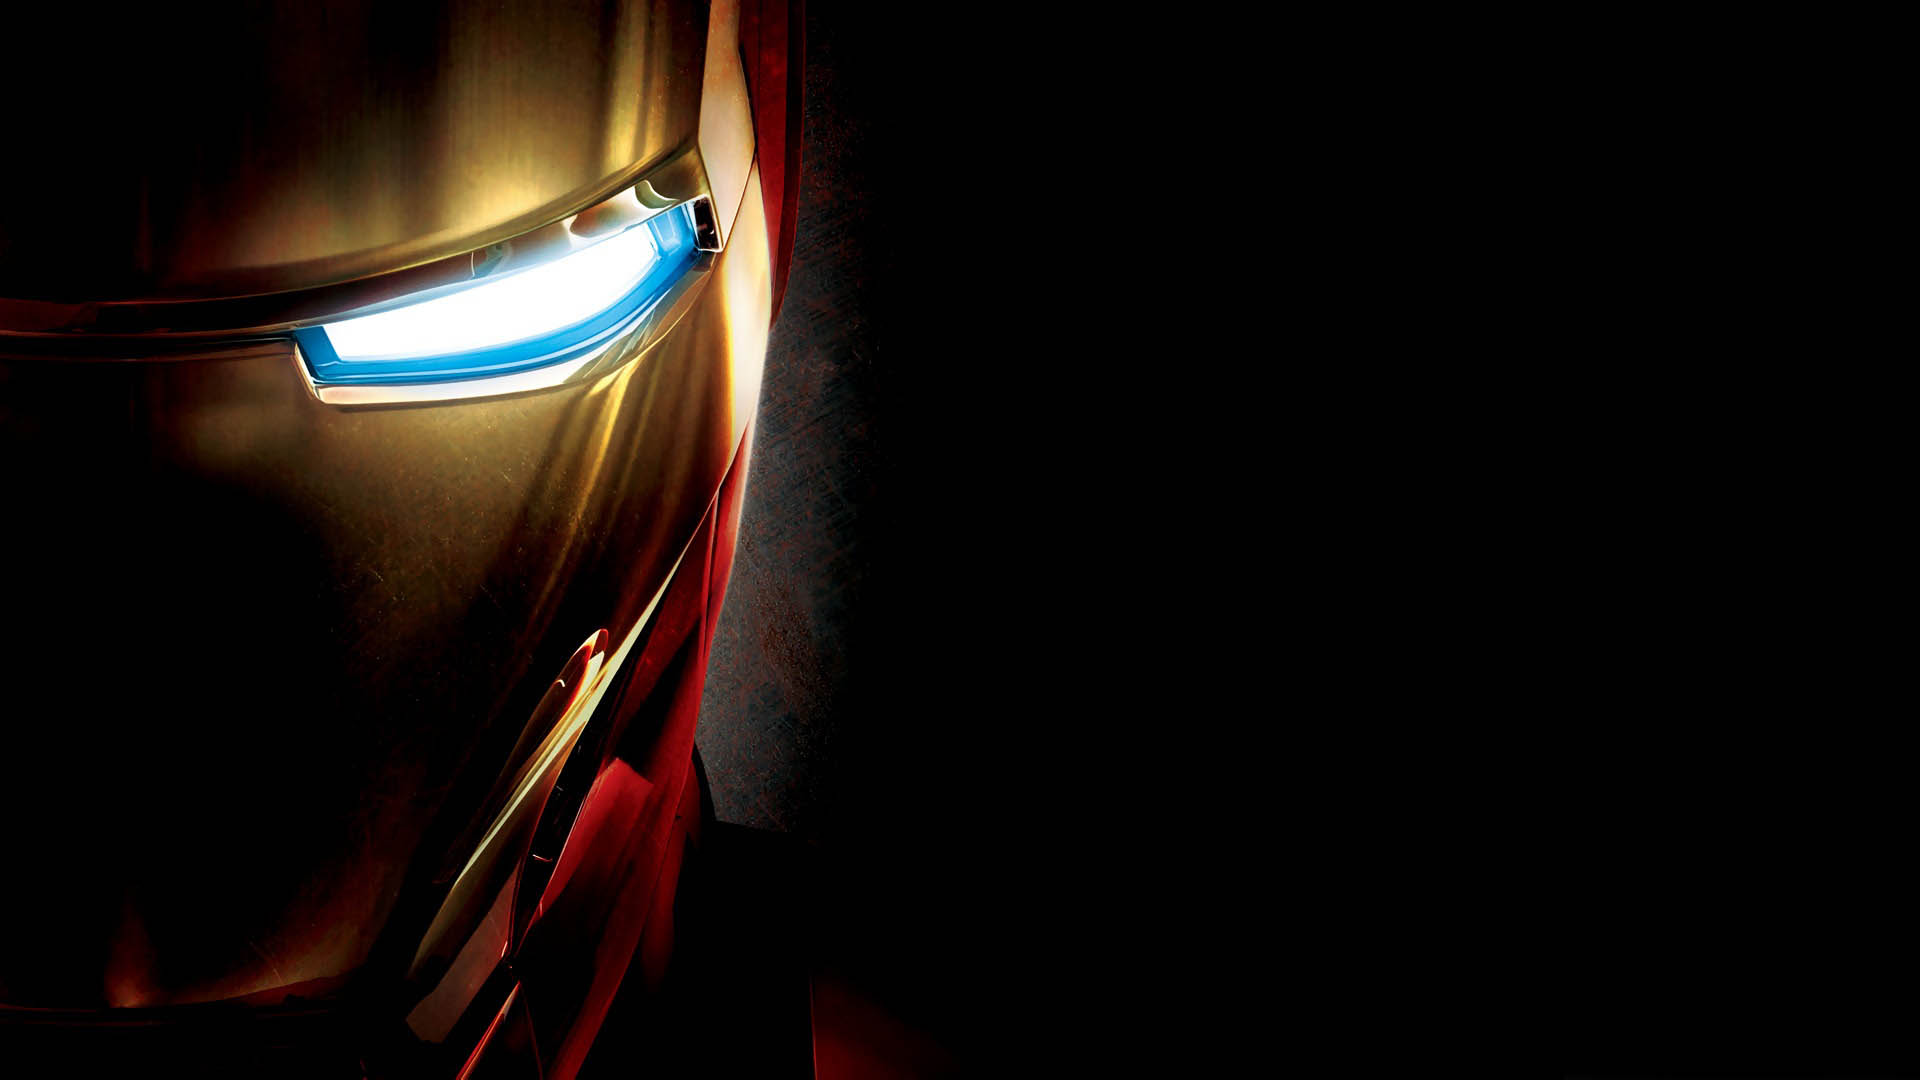 Iron Man Wallpaper For In HD